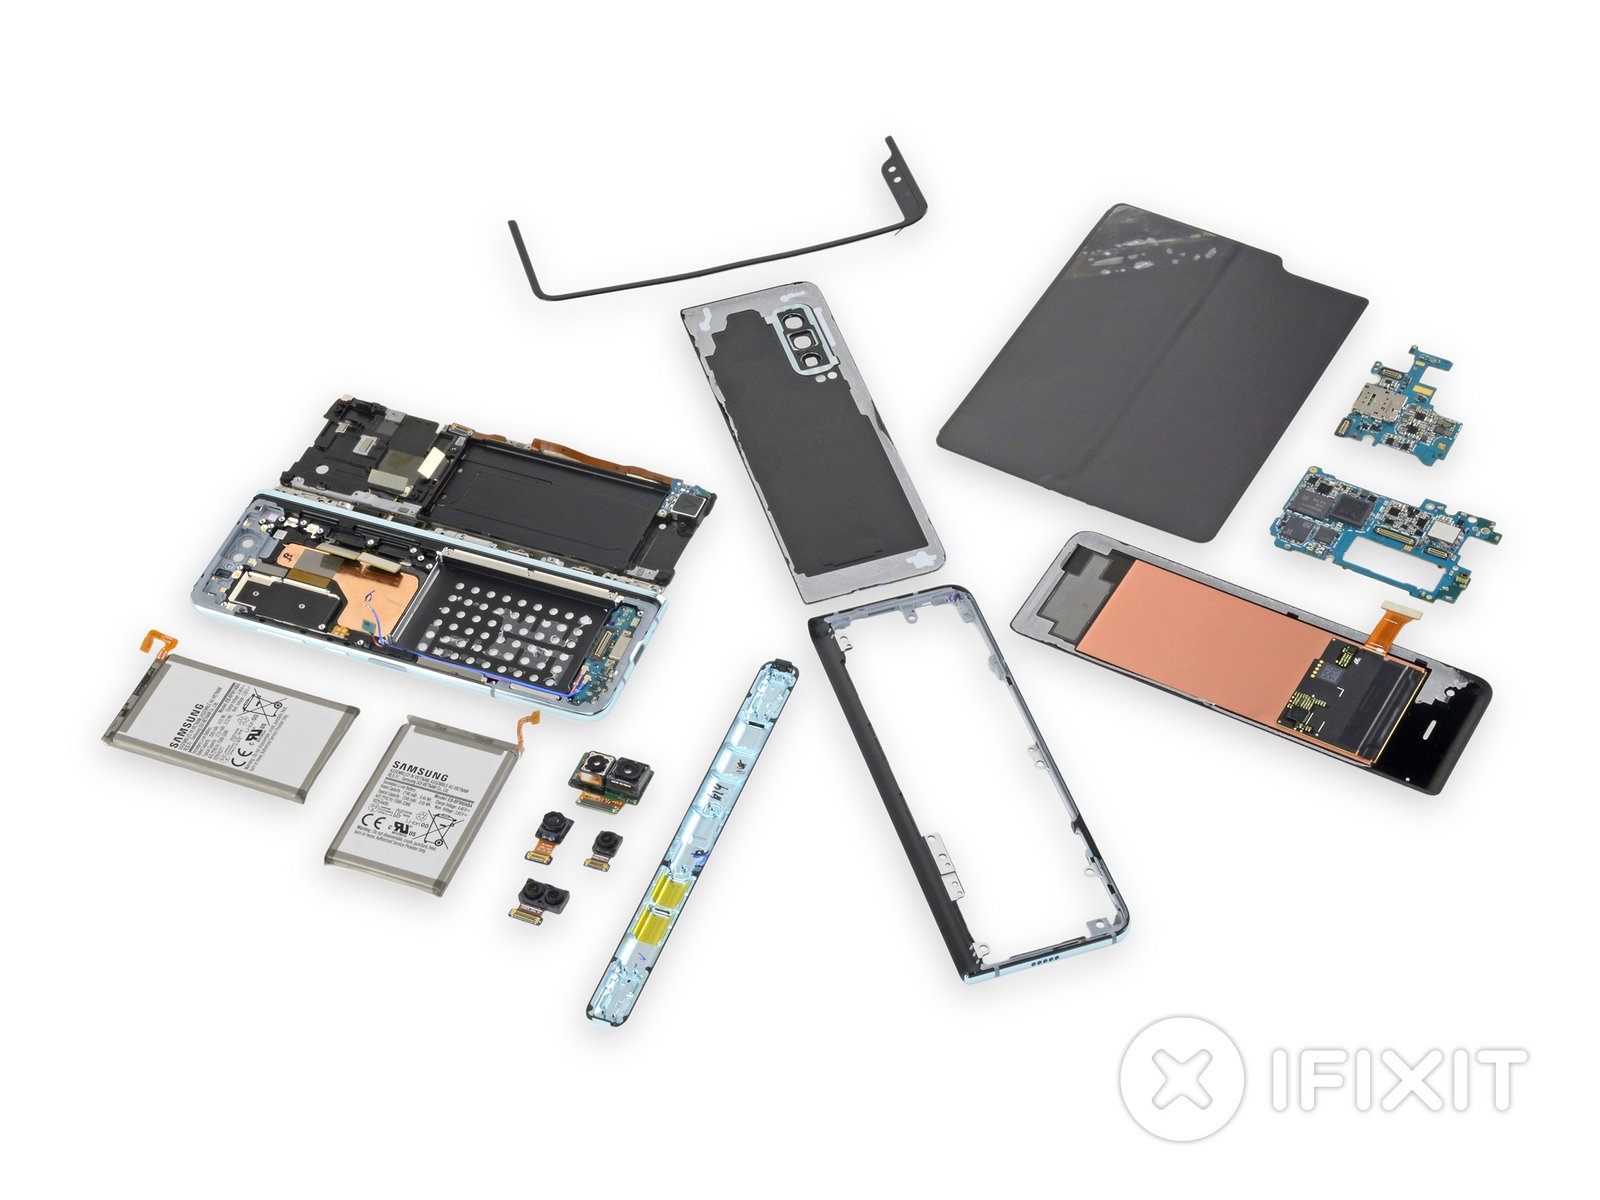 Samsung puts the screws to iFixit